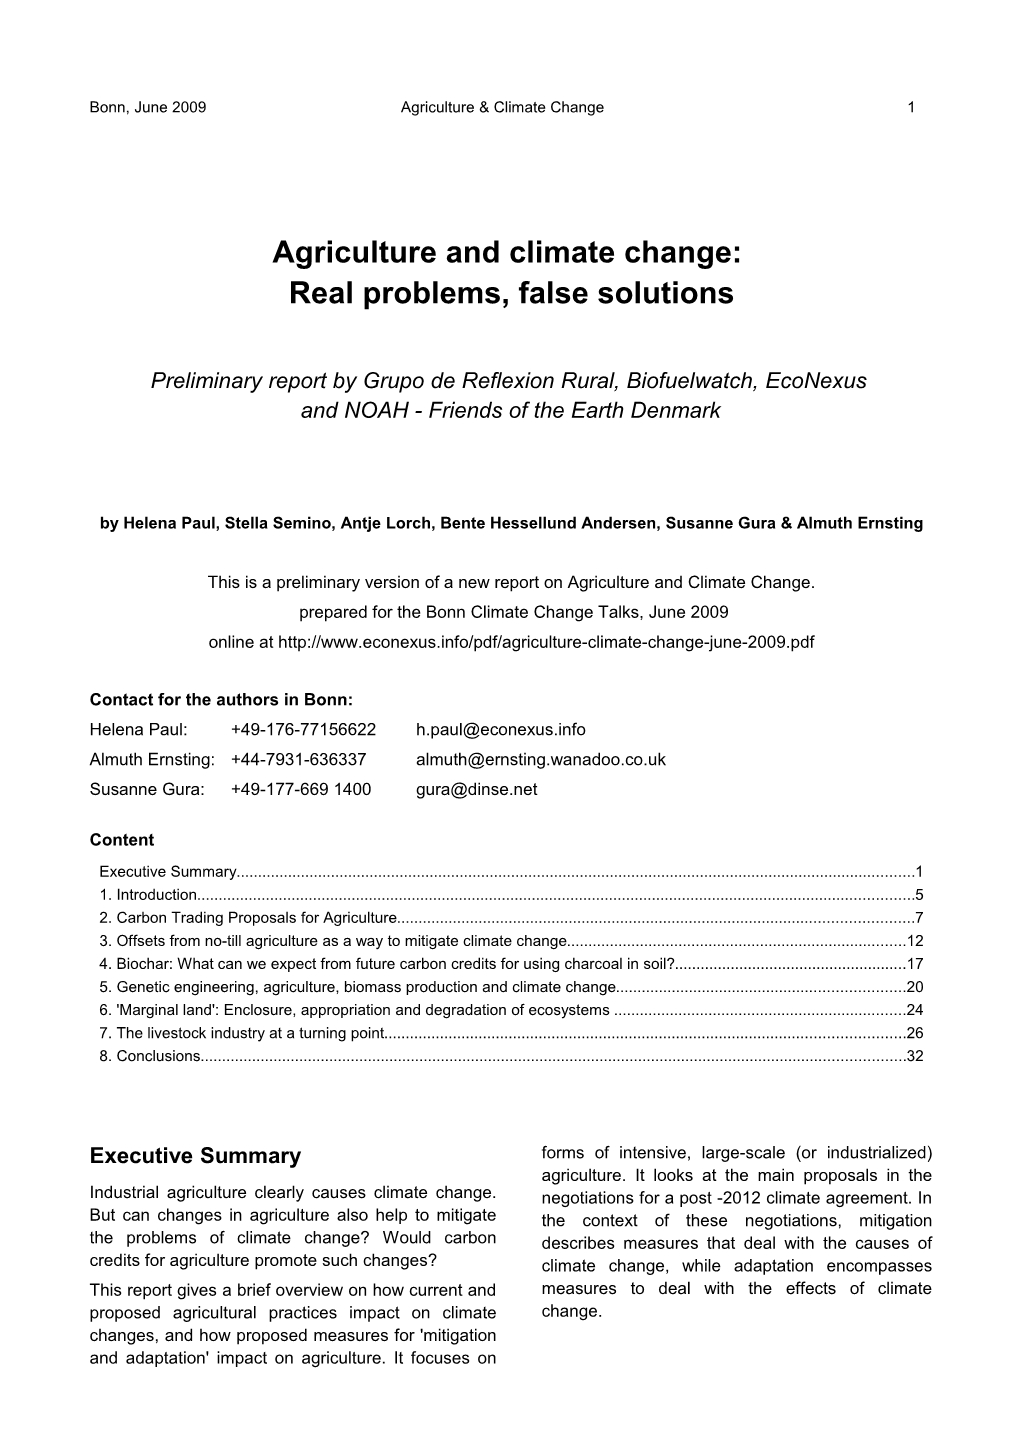 Agriculture and Climate Change: Real Problems, False Solutions